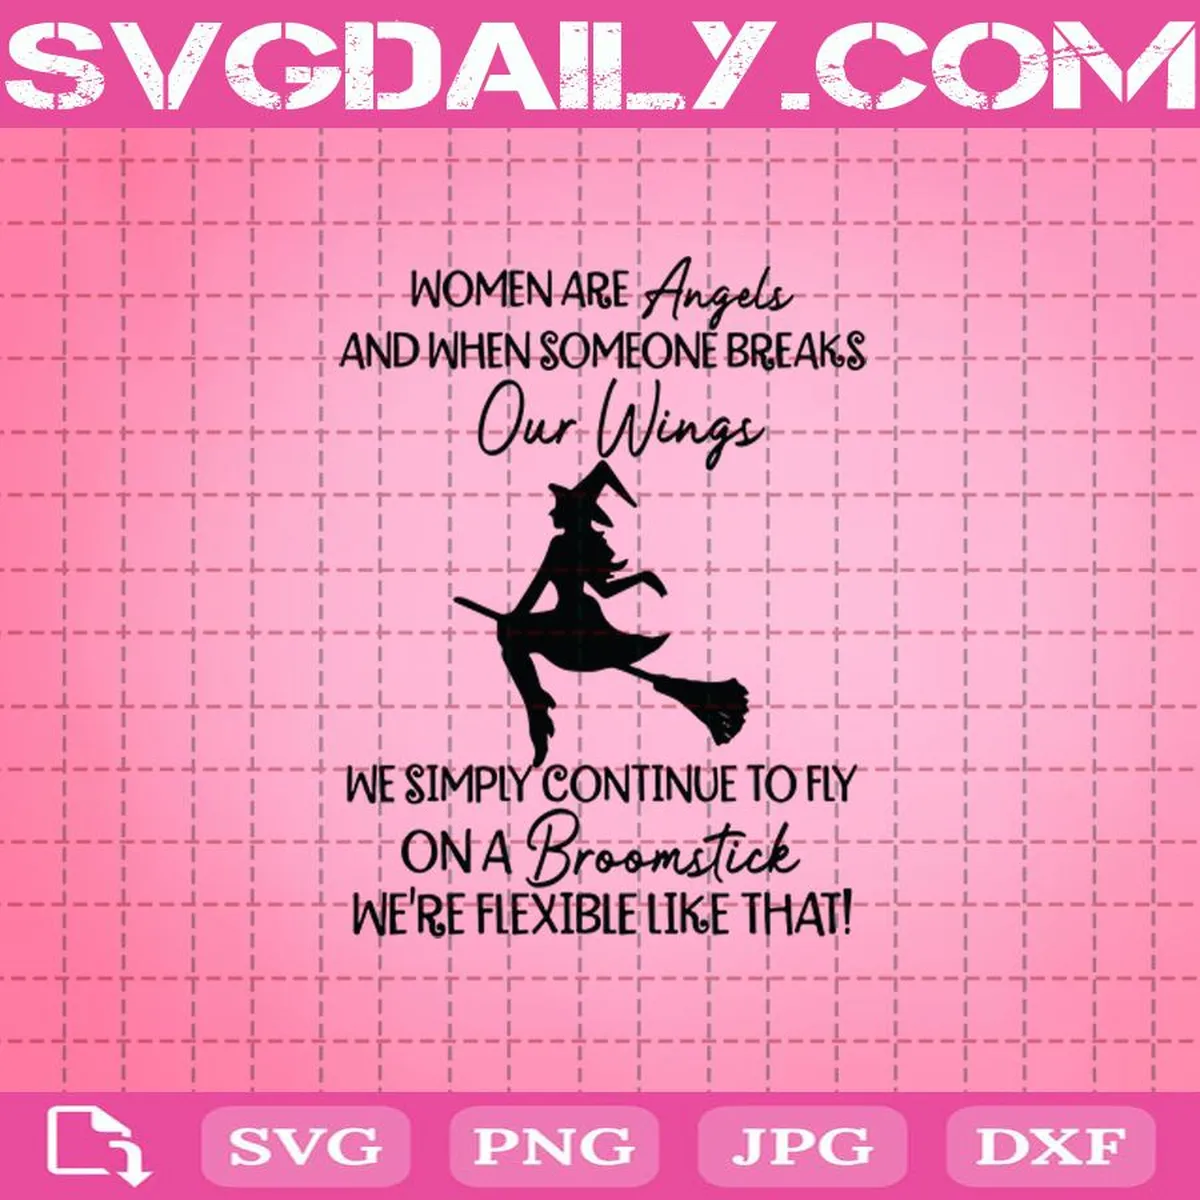 Women Are Angels And When Someone Breaks Our Wings We Simply Continue To Fly On A Broomstick We're Fiexible Like That Svg Png Dxf Eps AI Instant Download